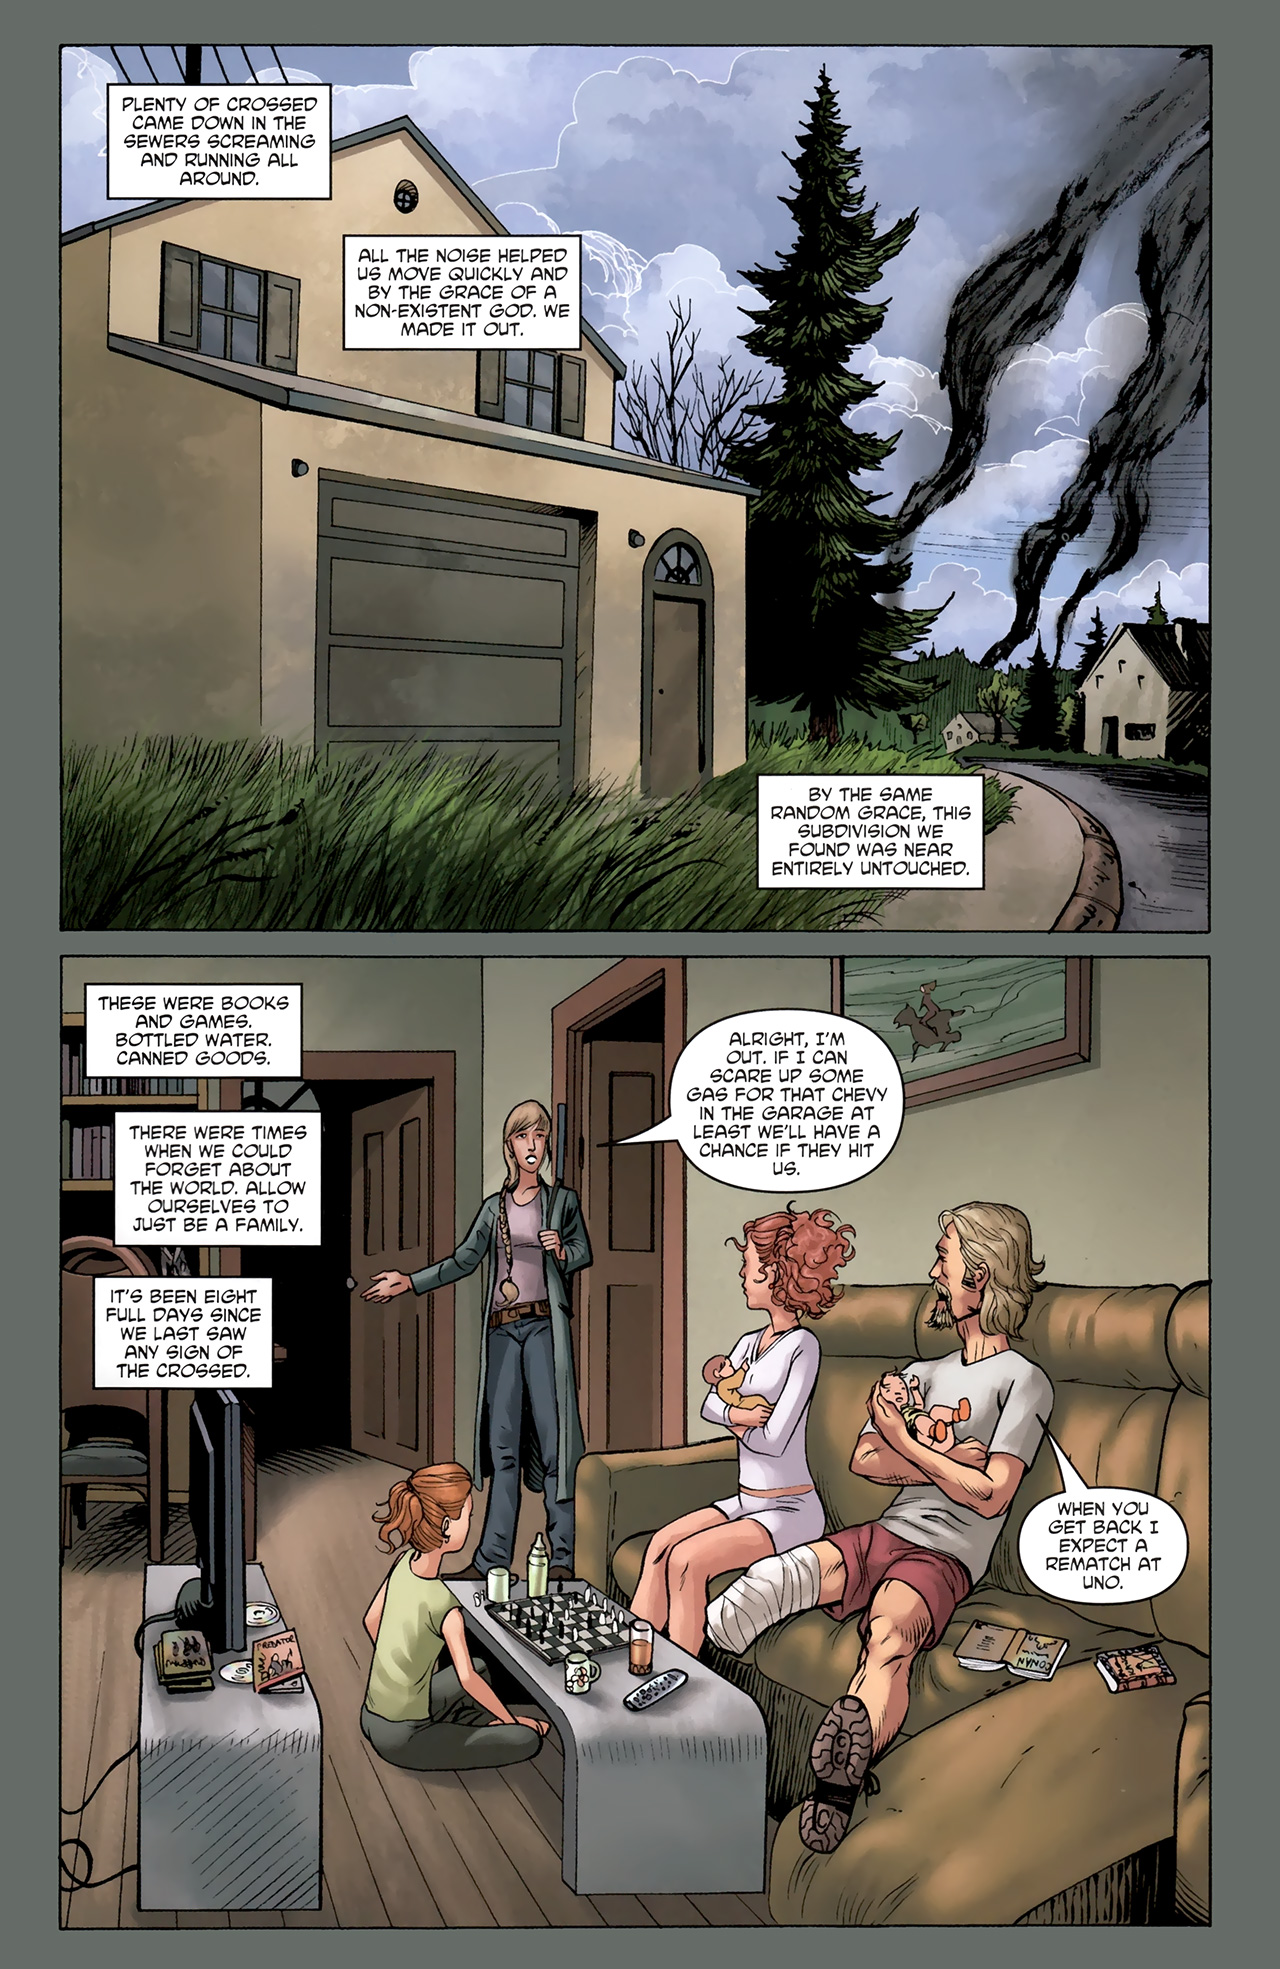 Crossed Family Values - Issue 7 of 7 (Conclusion)